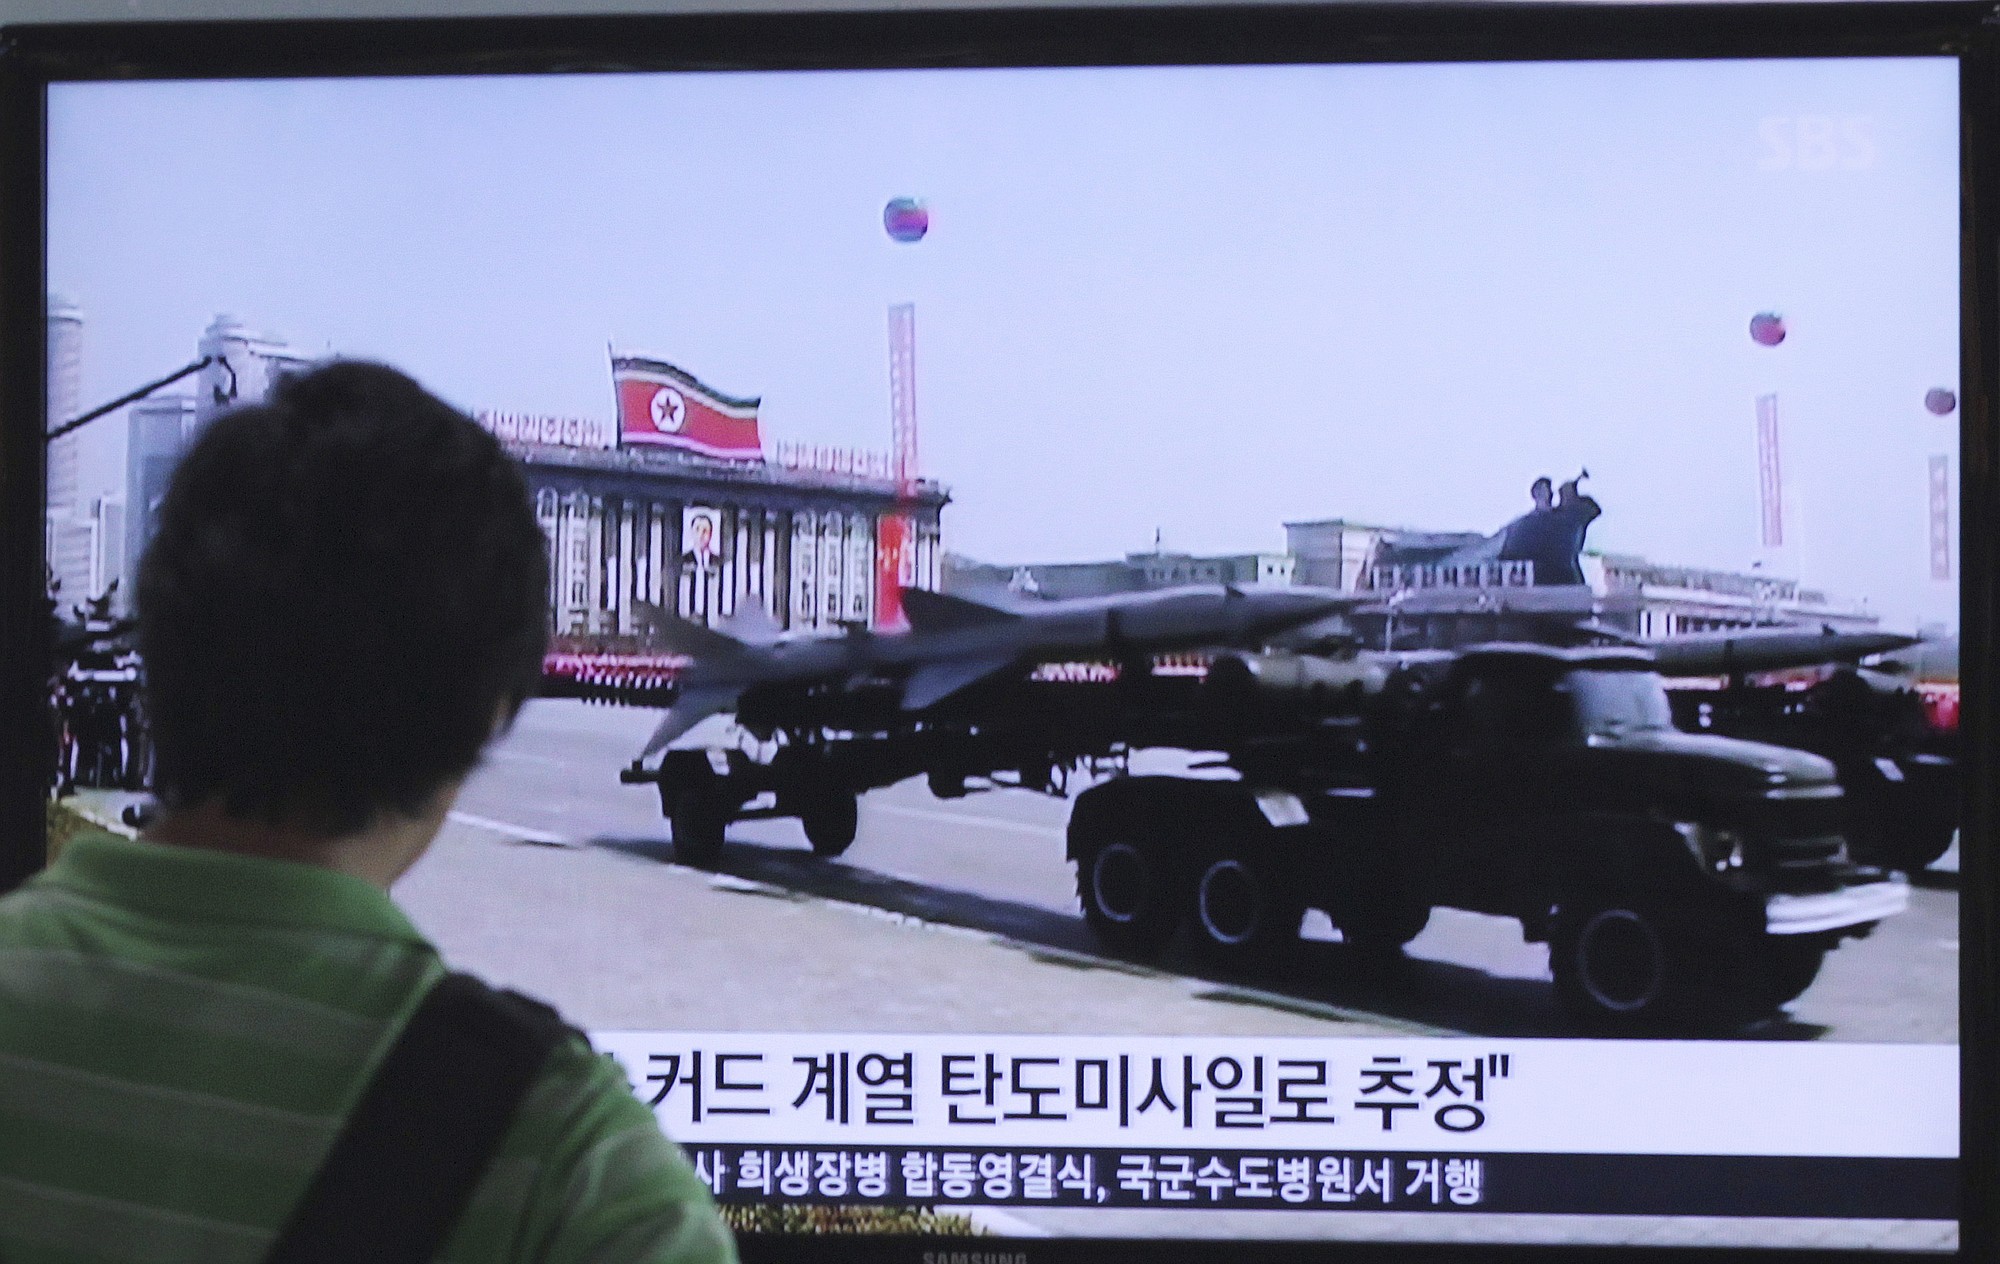 A man watches a TV news program Sunday showing file footage of a North Korean rocket carried during a military parade at Seoul Railway Station in Seoul, South Korea. North Korea fired two short-range missiles into its eastern waters Sunday, a South Korean official said, an apparent test fire that comes just days after the country tested what it called new precision-guided missiles.